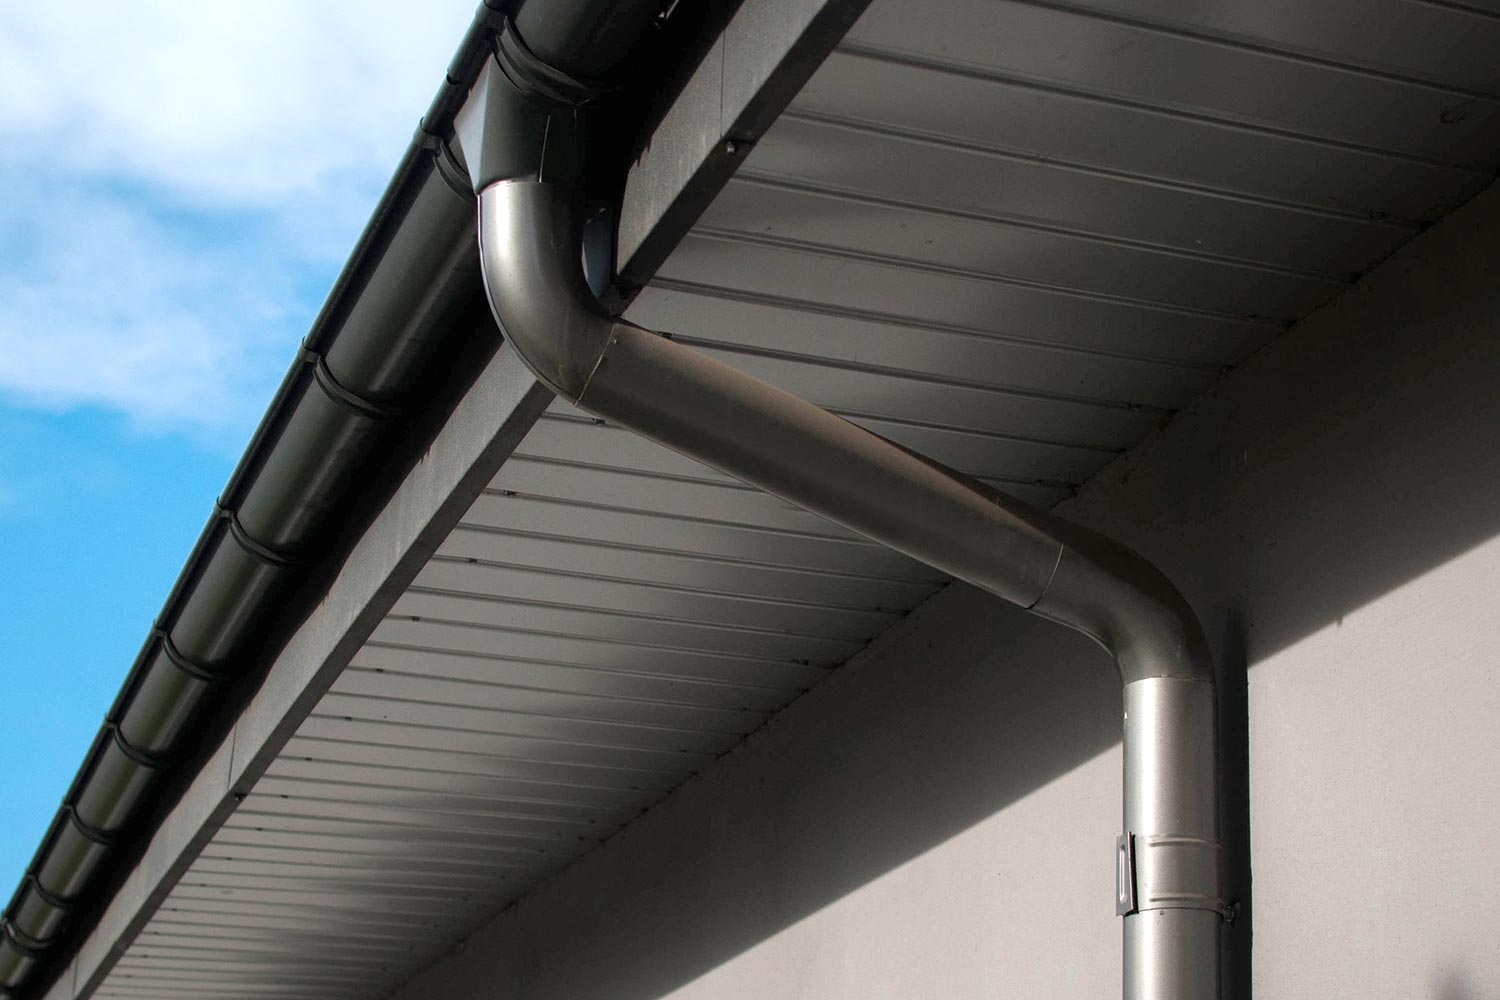 Coated rain gutter and rain water pipe at a roof